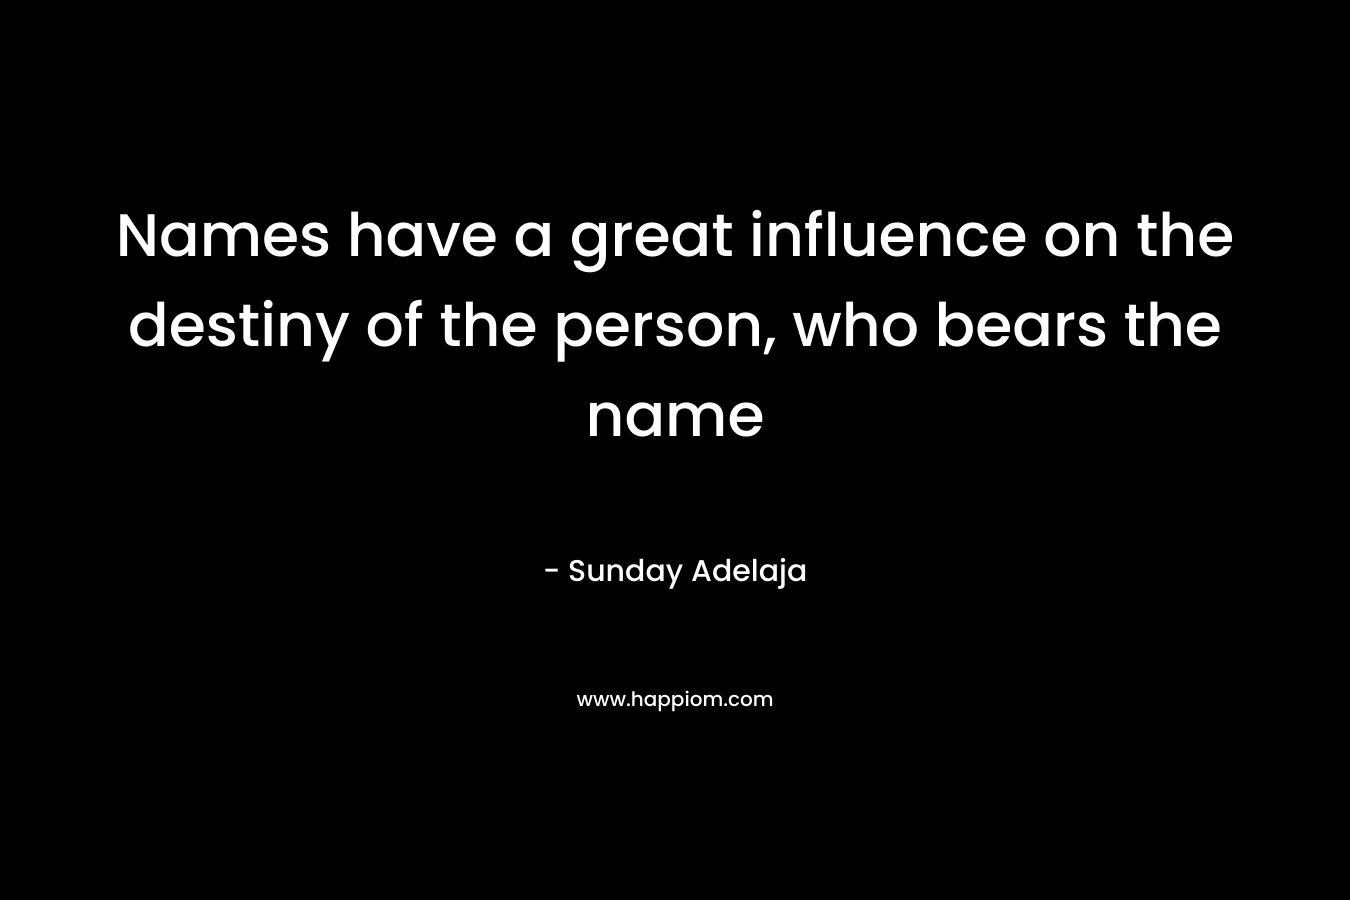 Names have a great influence on the destiny of the person, who bears the name